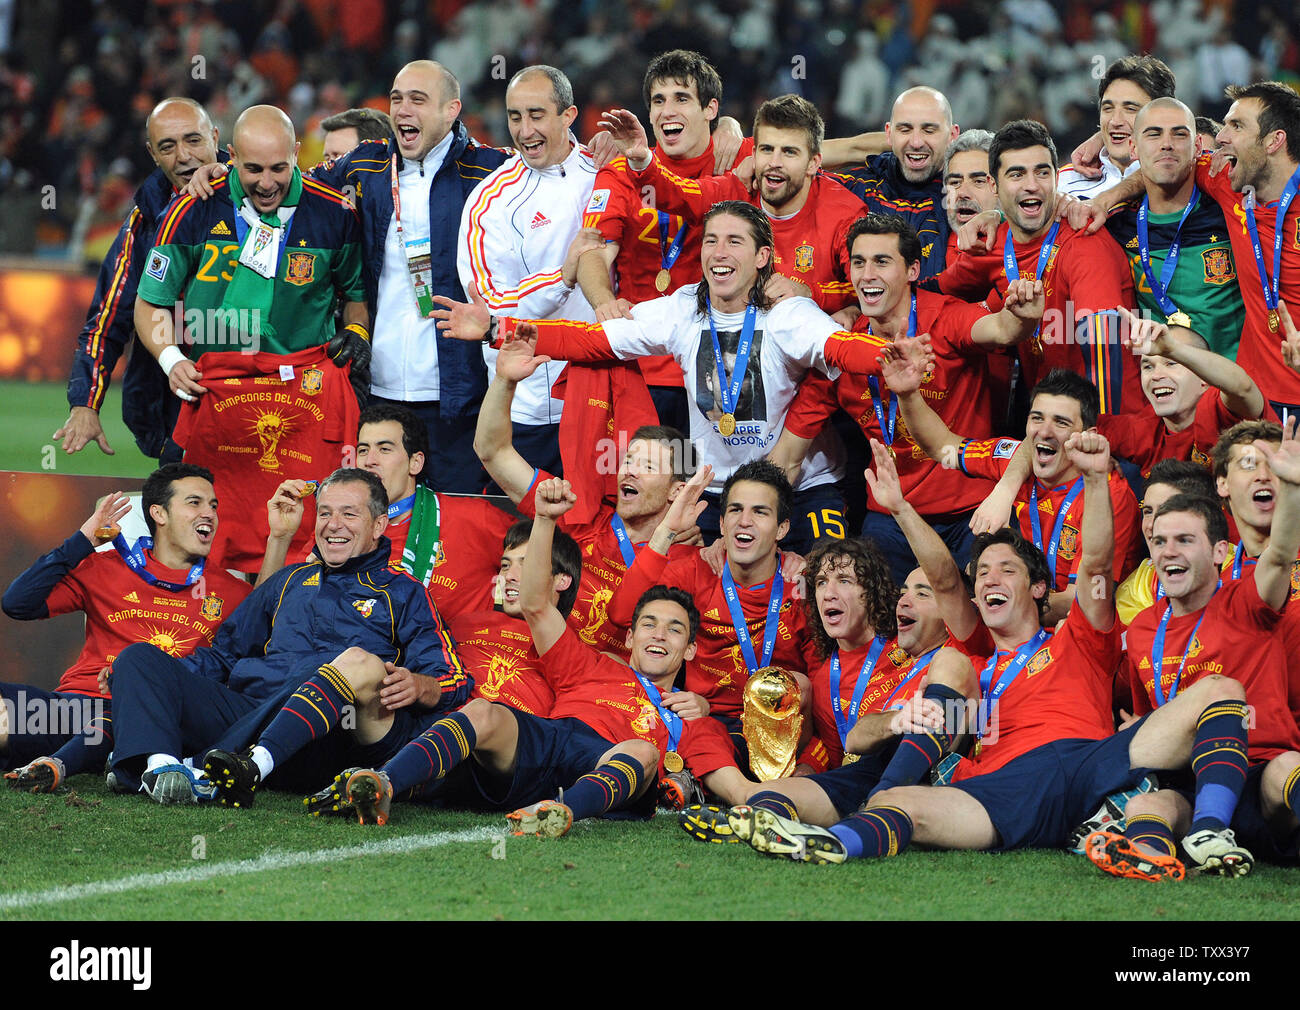 Spain celebrate following the FIFA World Cup Final match at Soccer City Stadium in Johannesburg, South Africa on July 11, 2010. UPI/Chris Brunskill Stock Photo